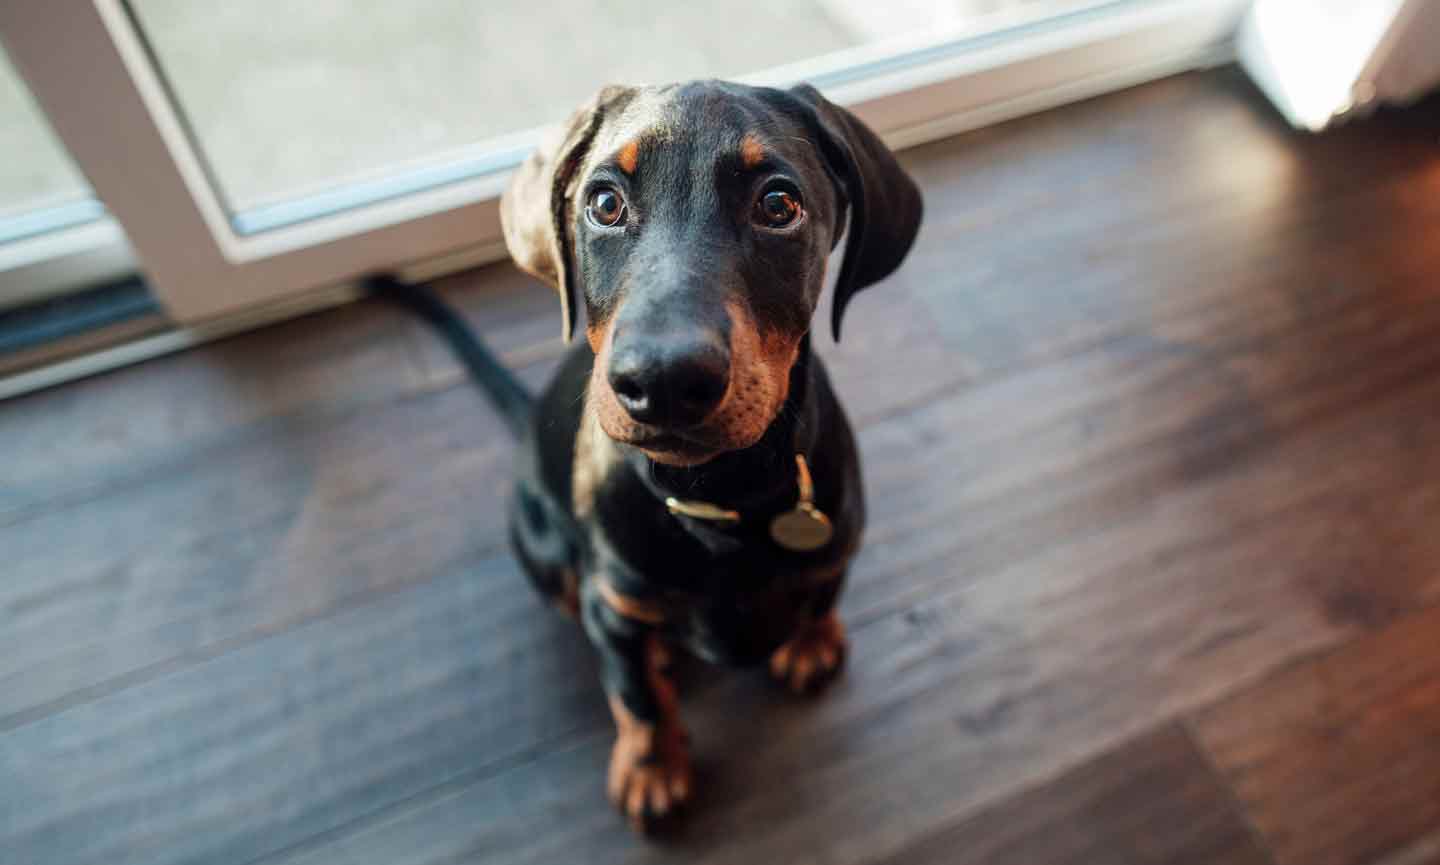 Doberman puppy sitting on the floor and looking up at the camera